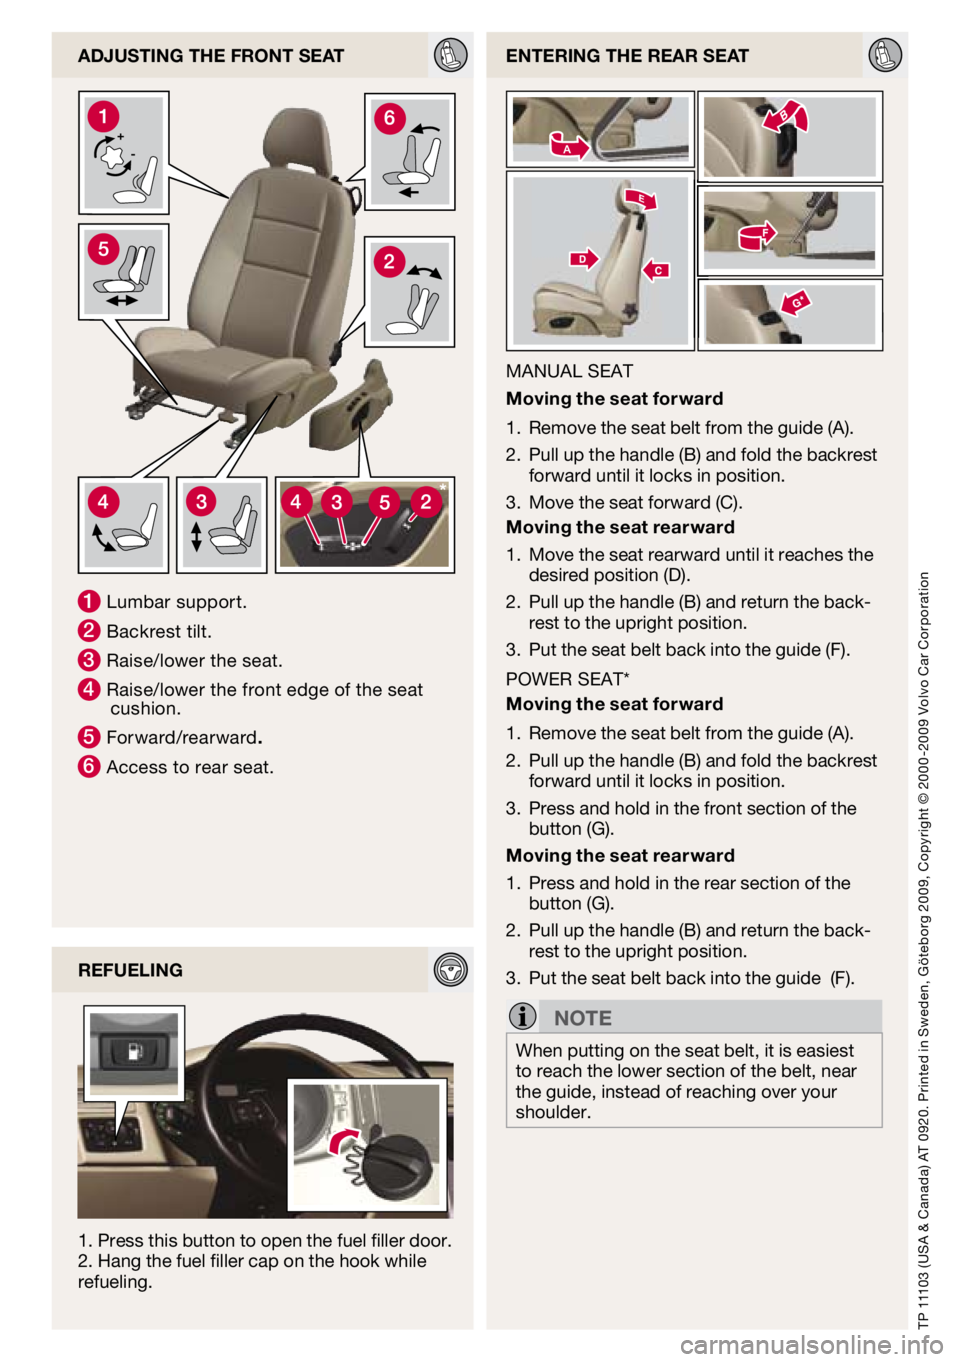 VOLVO C30 2010  Quick Guide 
TP 11103 (USa & Canada)  aT 0920. Printed in Sweden,  göteborg 2009, Copyright © 2000 -2009  volvo Car Corporation
entering the rear Seat
MaNUal  SeaT
m oving the seat forward
Remove the seat belt 